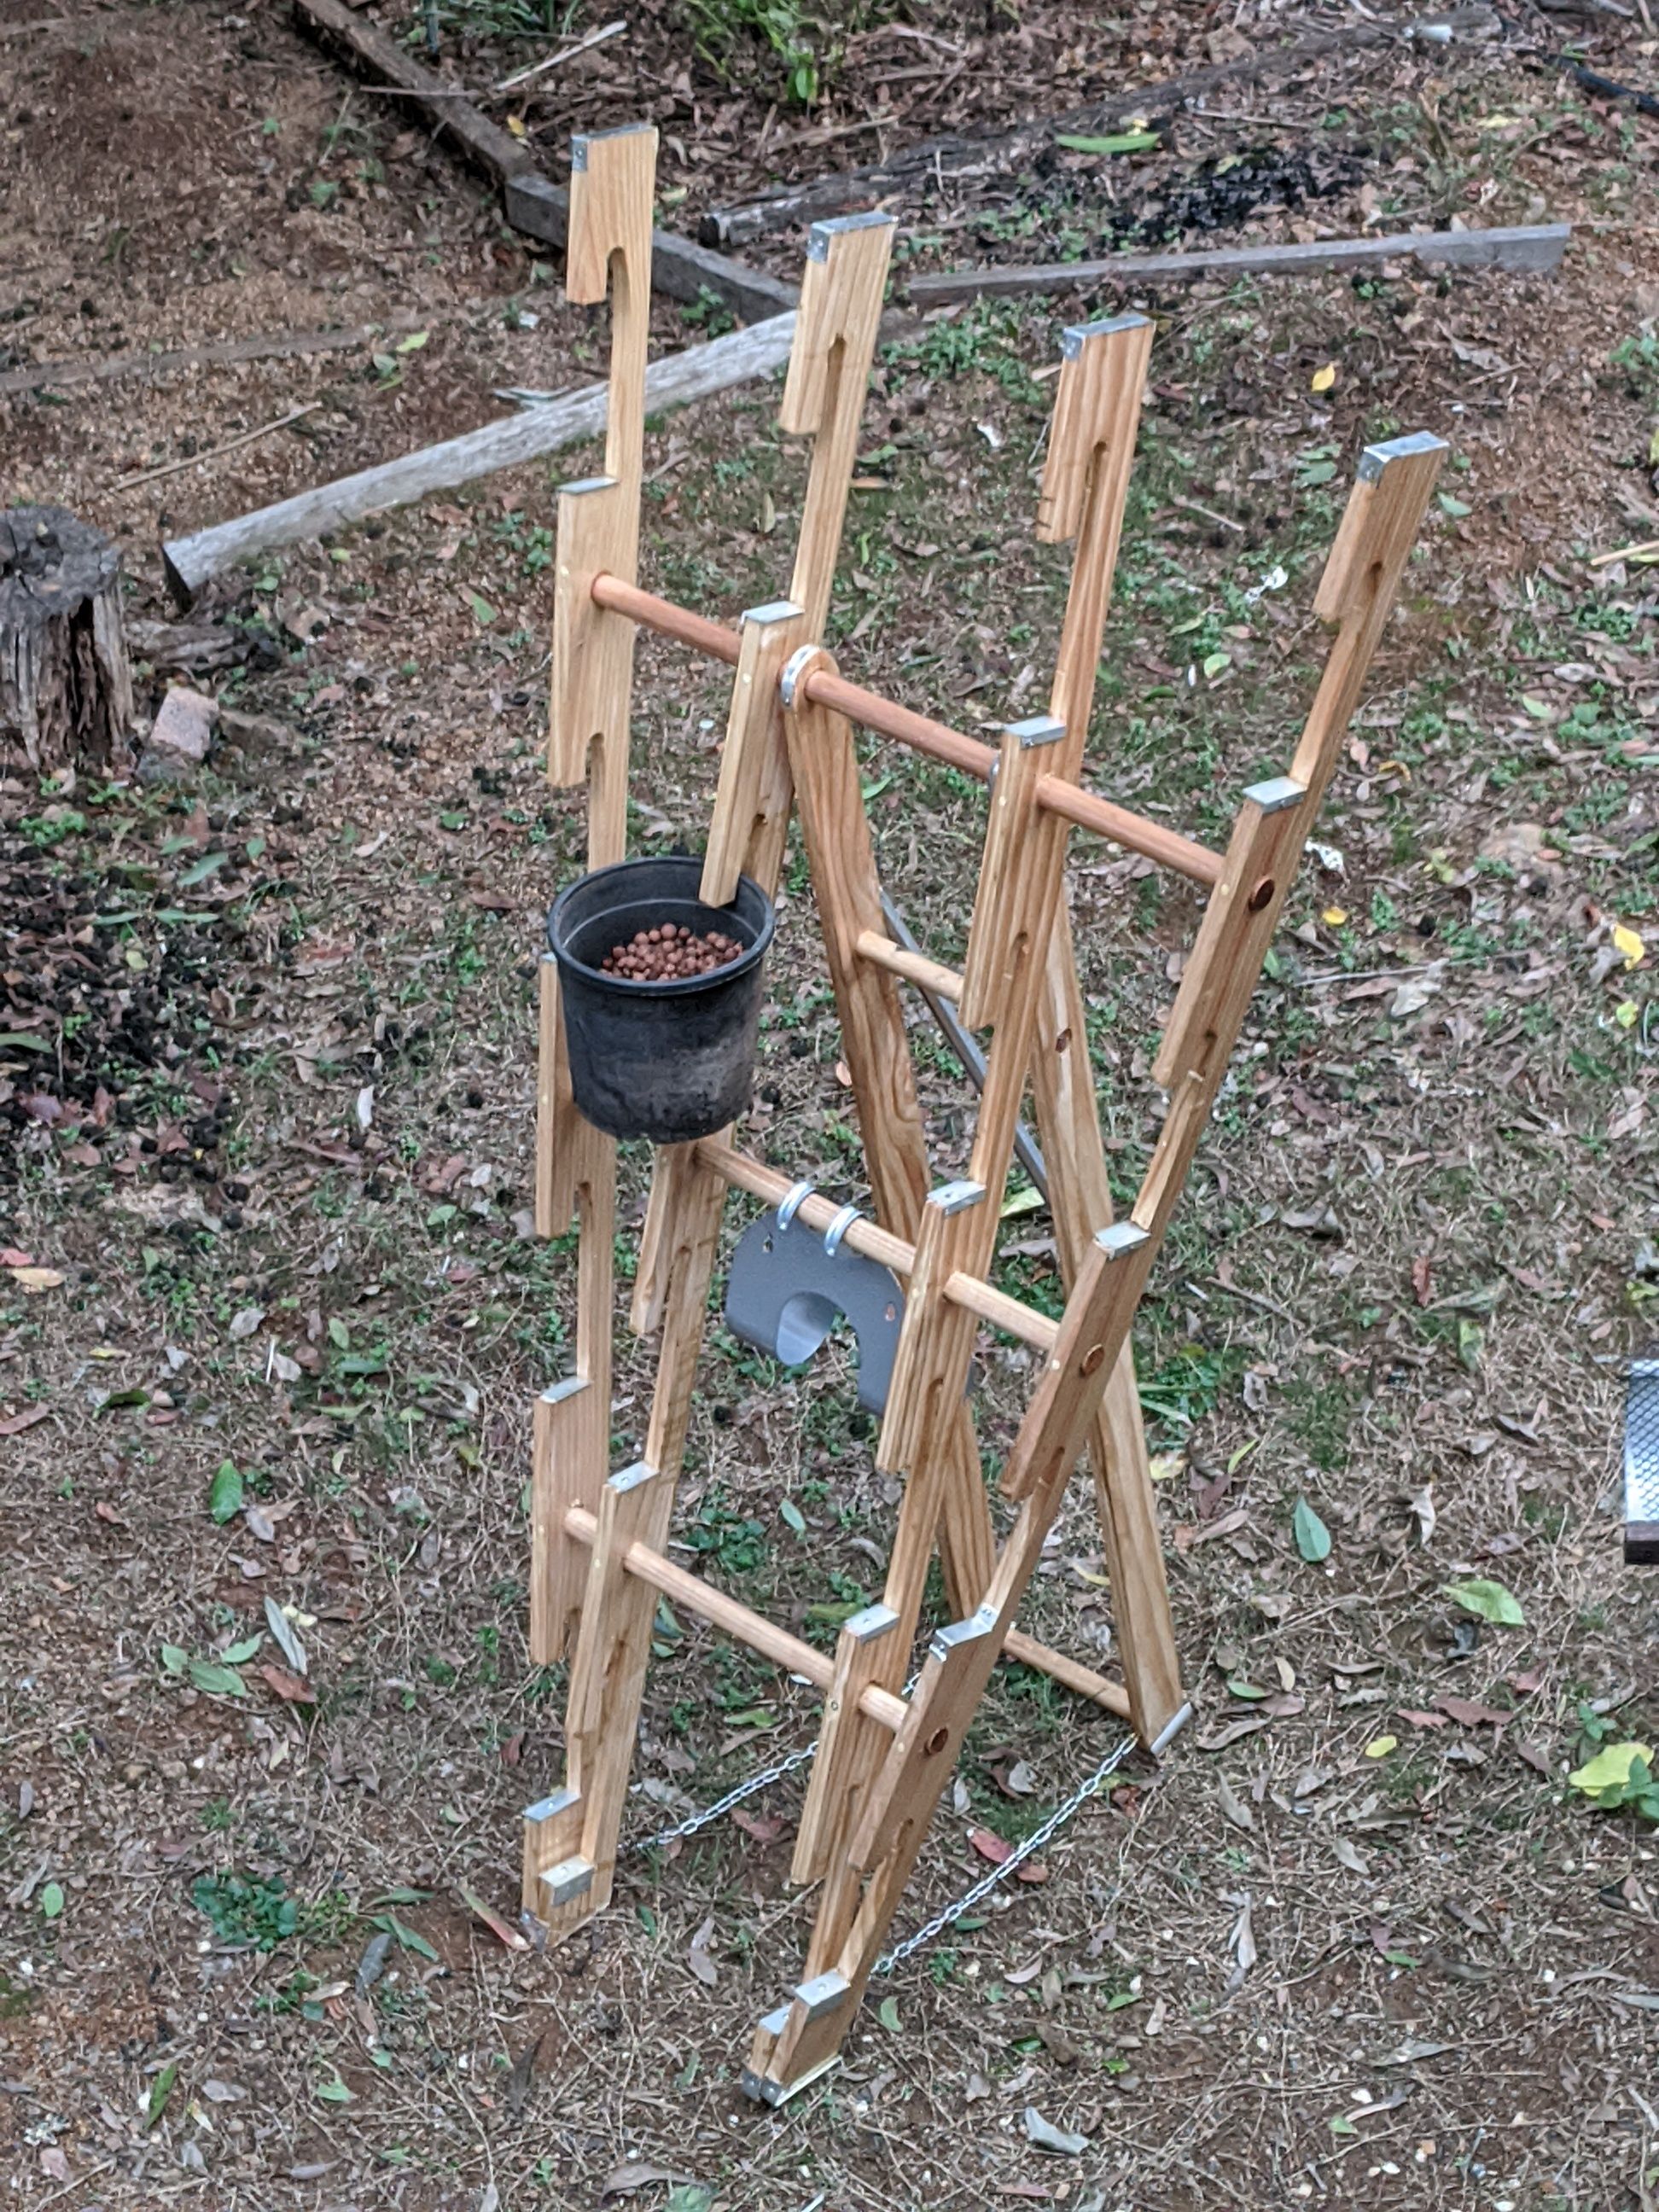 Compact pot plant stand for new garden a | Bunnings Workshop community